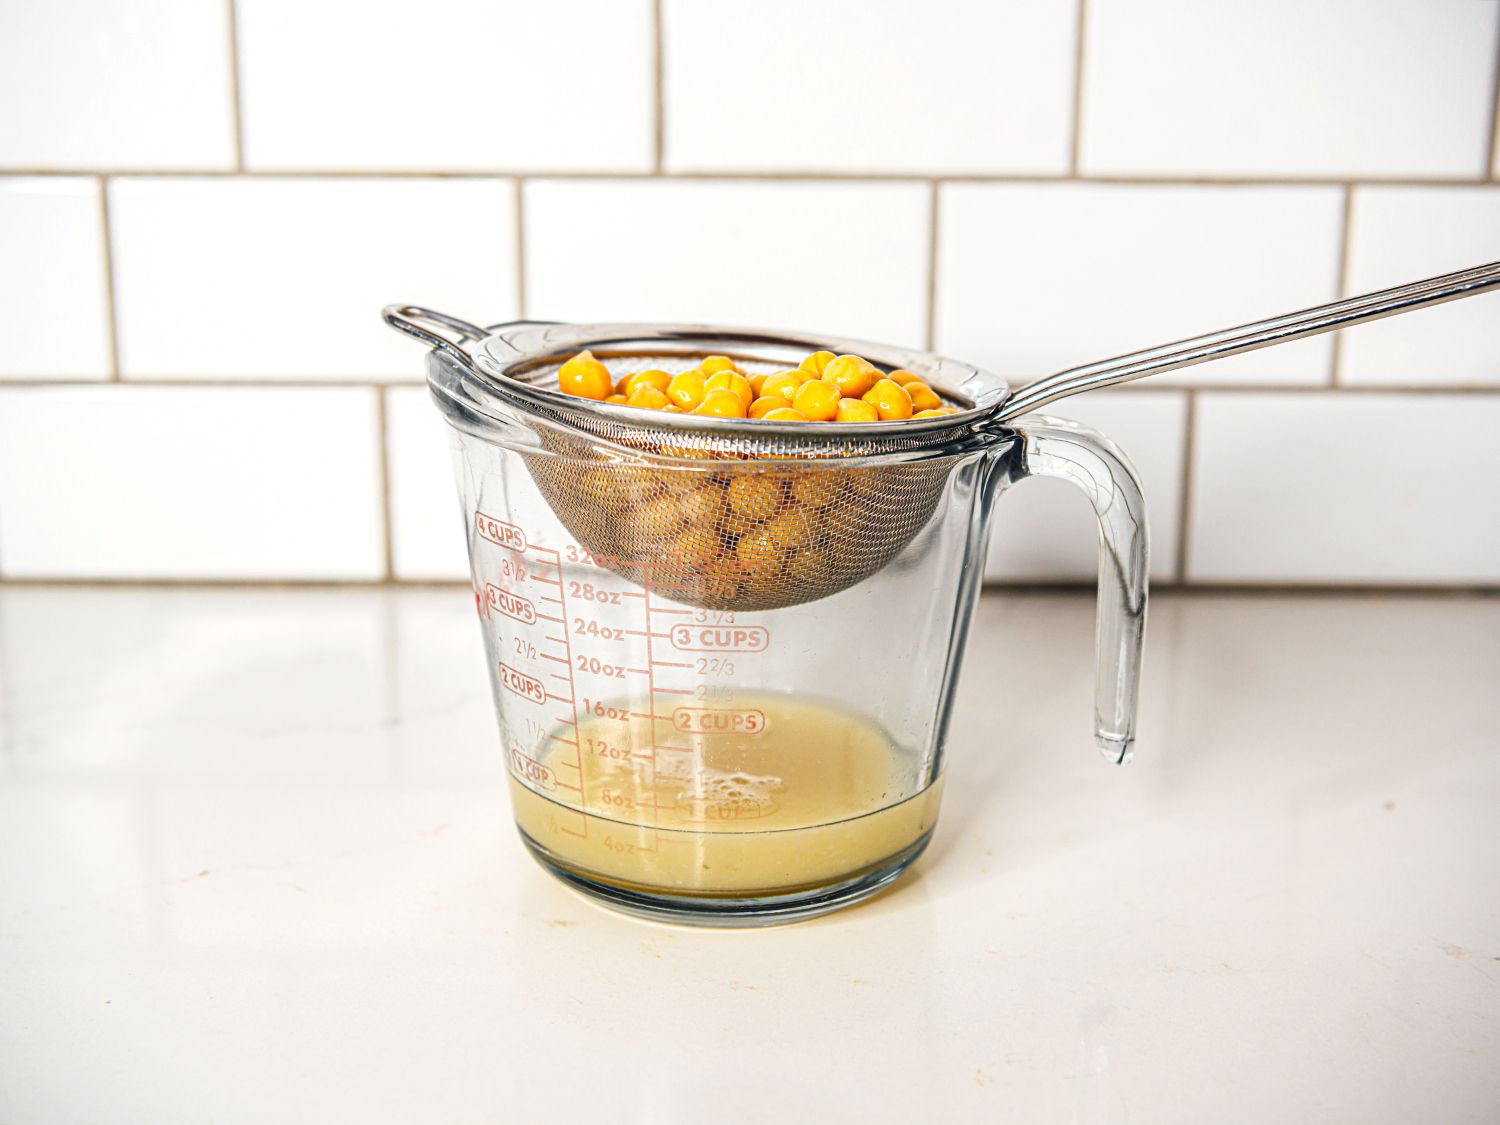 a can of chickpeas draining their liquid (aquafaba) into a glass measuring cup